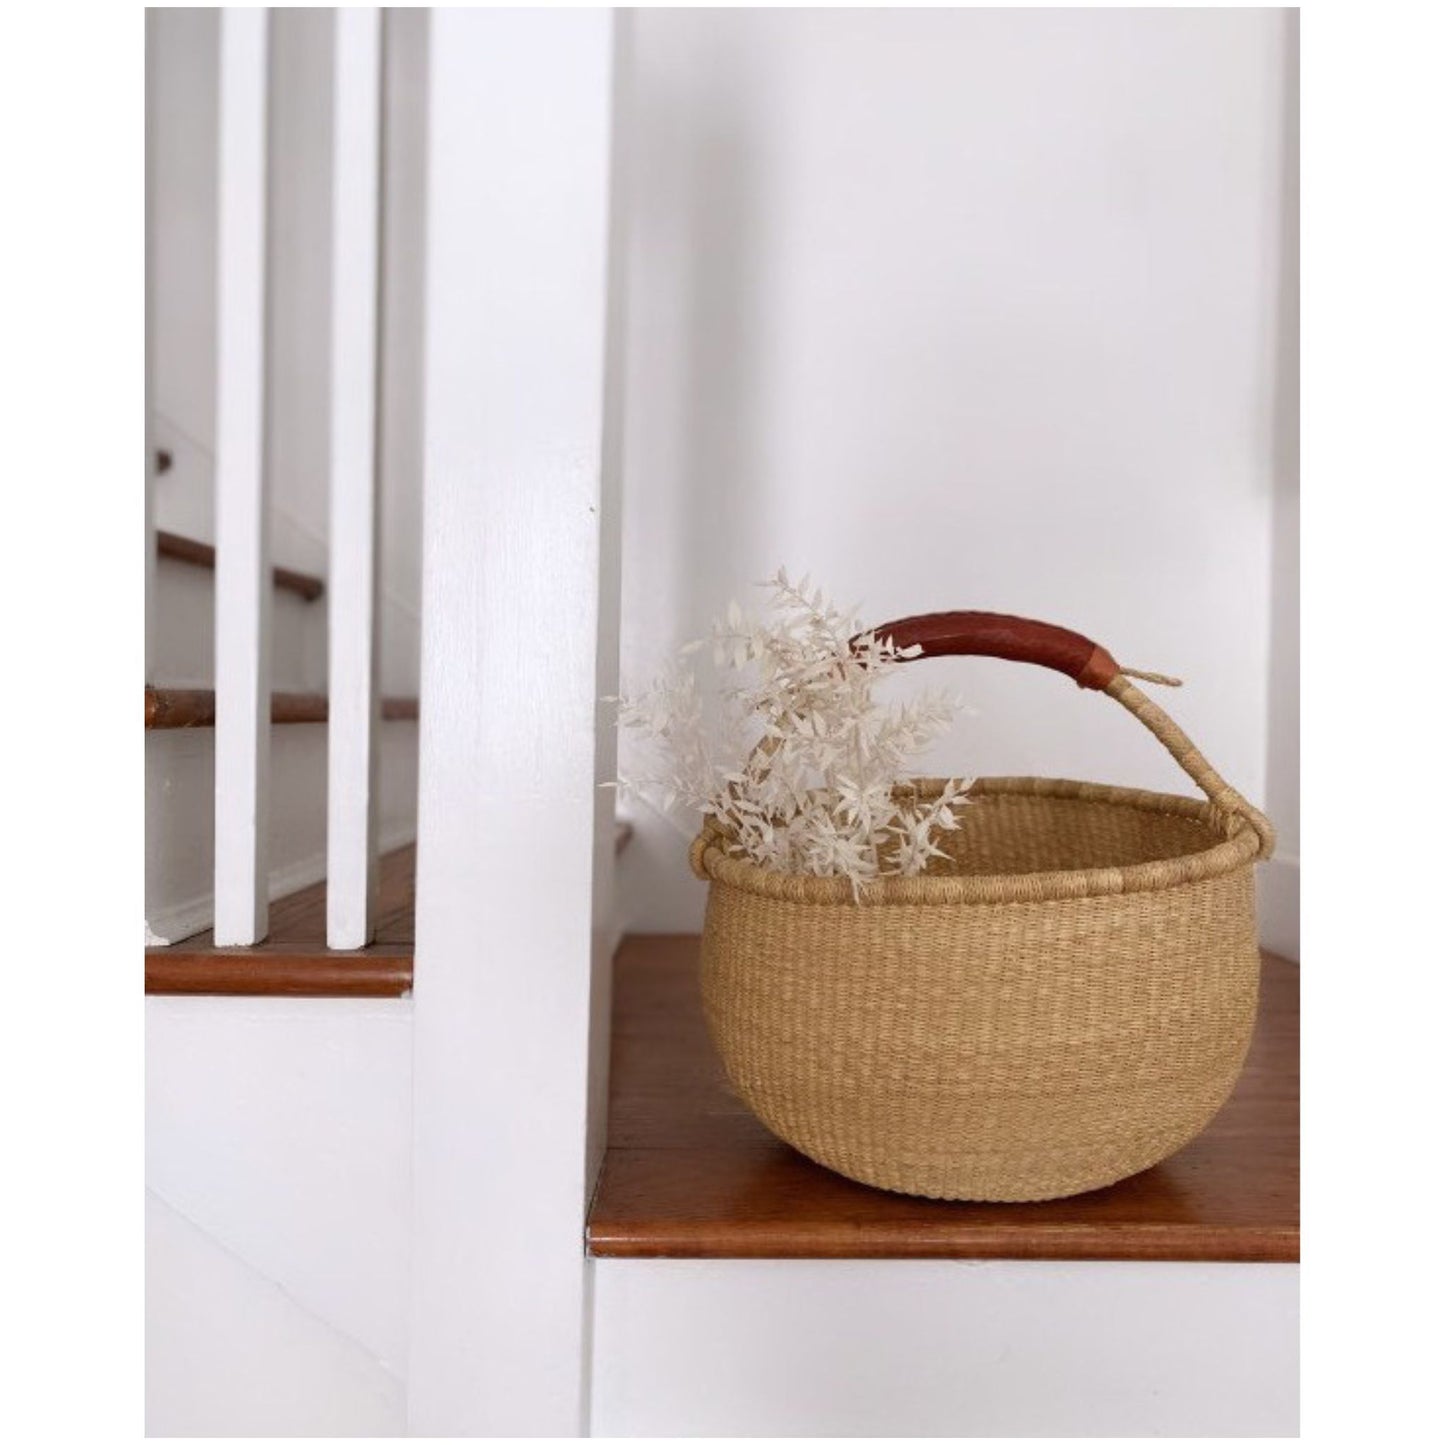 large natural Bolga basket with leather handle and dried flowers on stairs